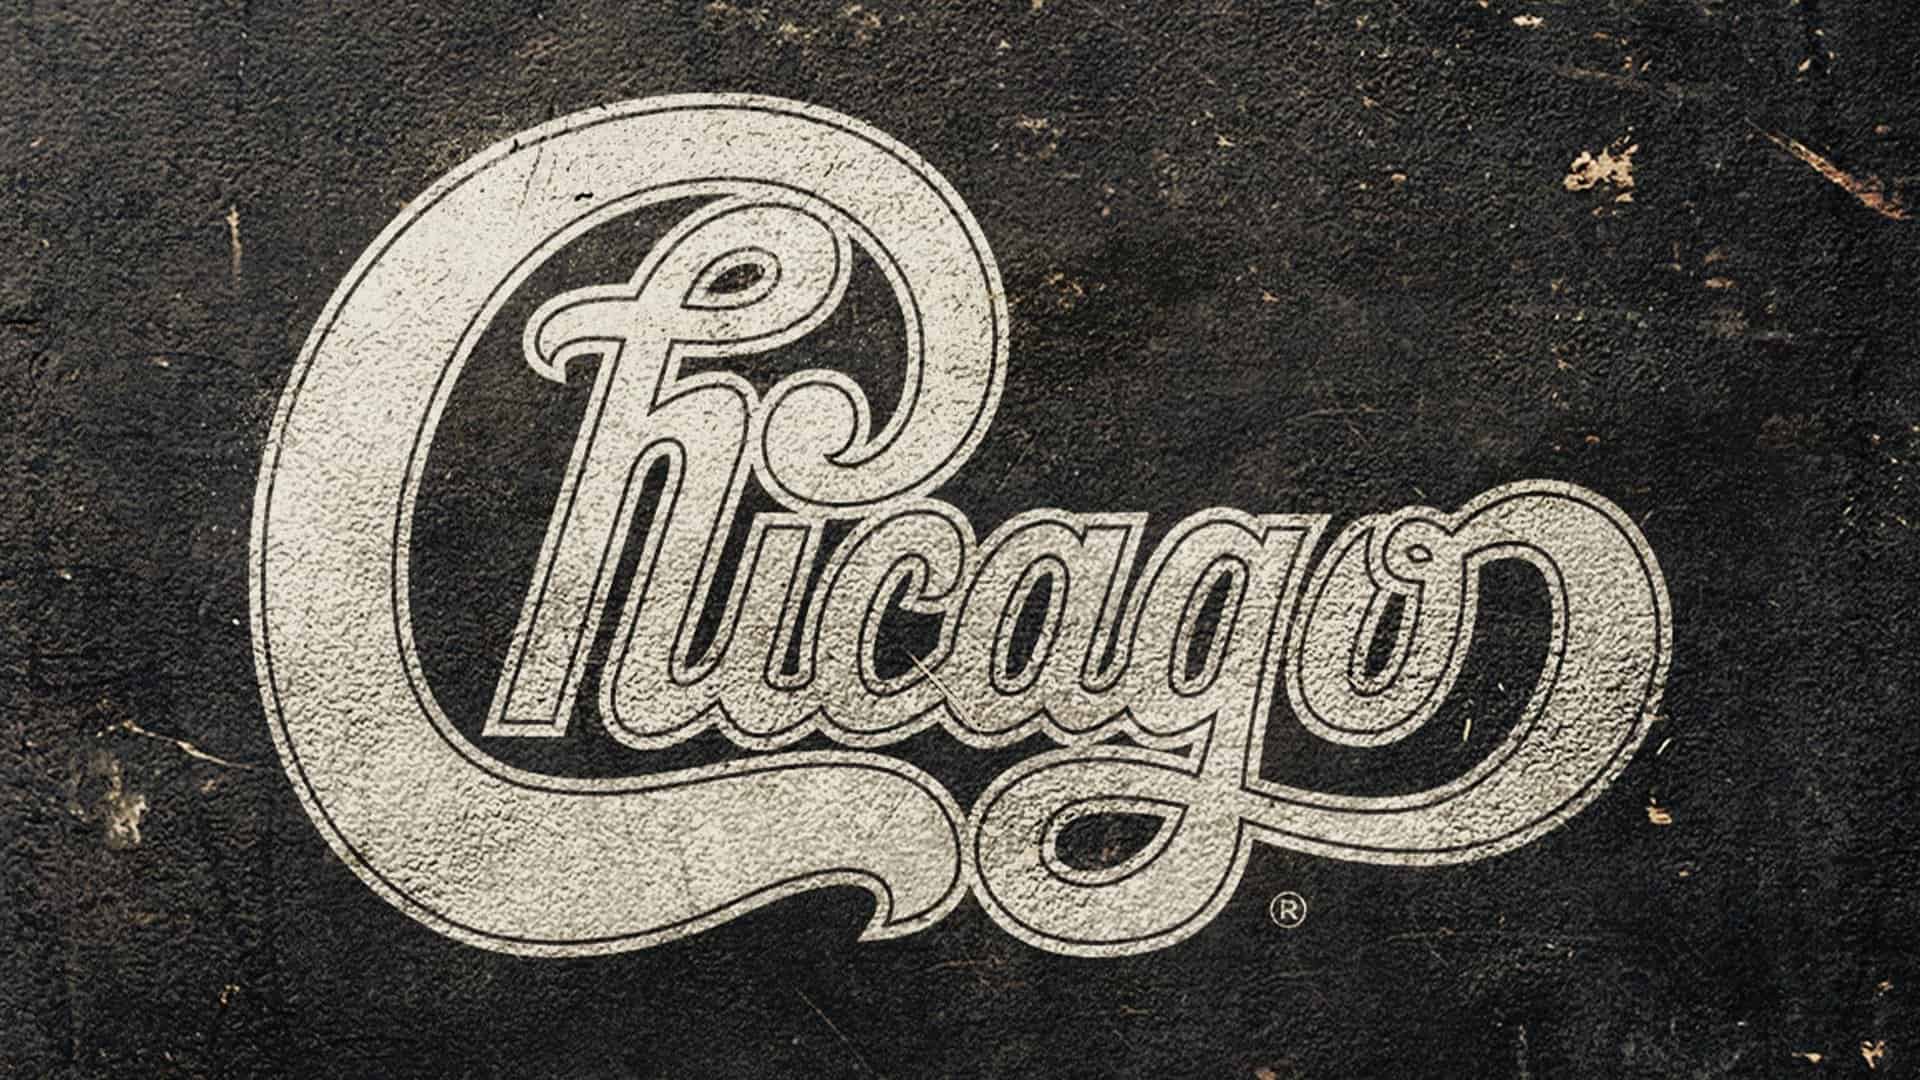 Logo of the band Chicago